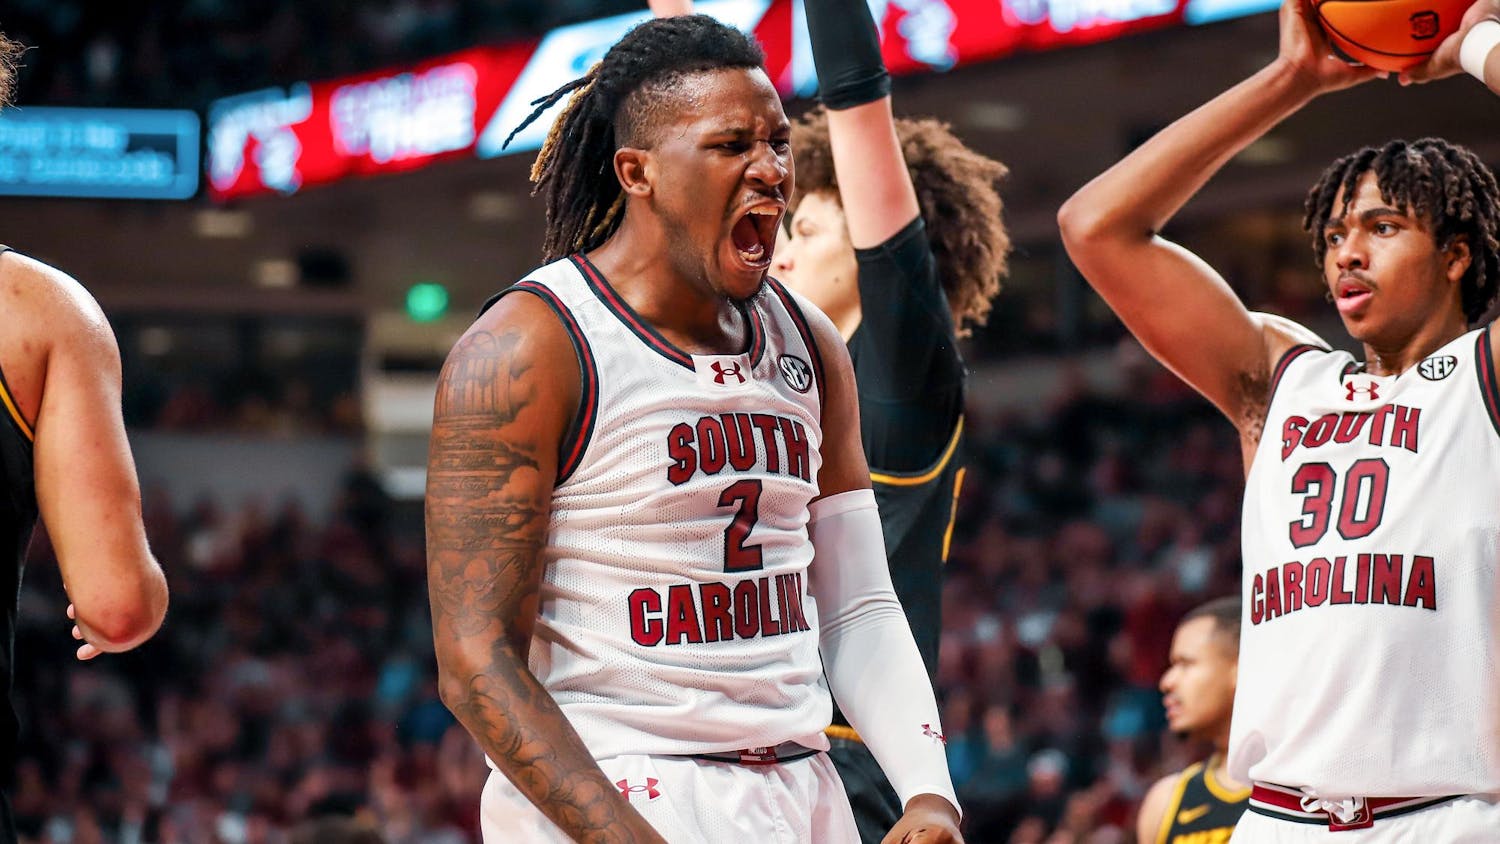 Graduate student forward B.J. Mack celebrates during South Carolina's matchup against Missouri at Colonial Life Arena on Jan. 27, 2024. Mack scored 21 points during the Gamecocks' 72-64 victory over the Tigers.